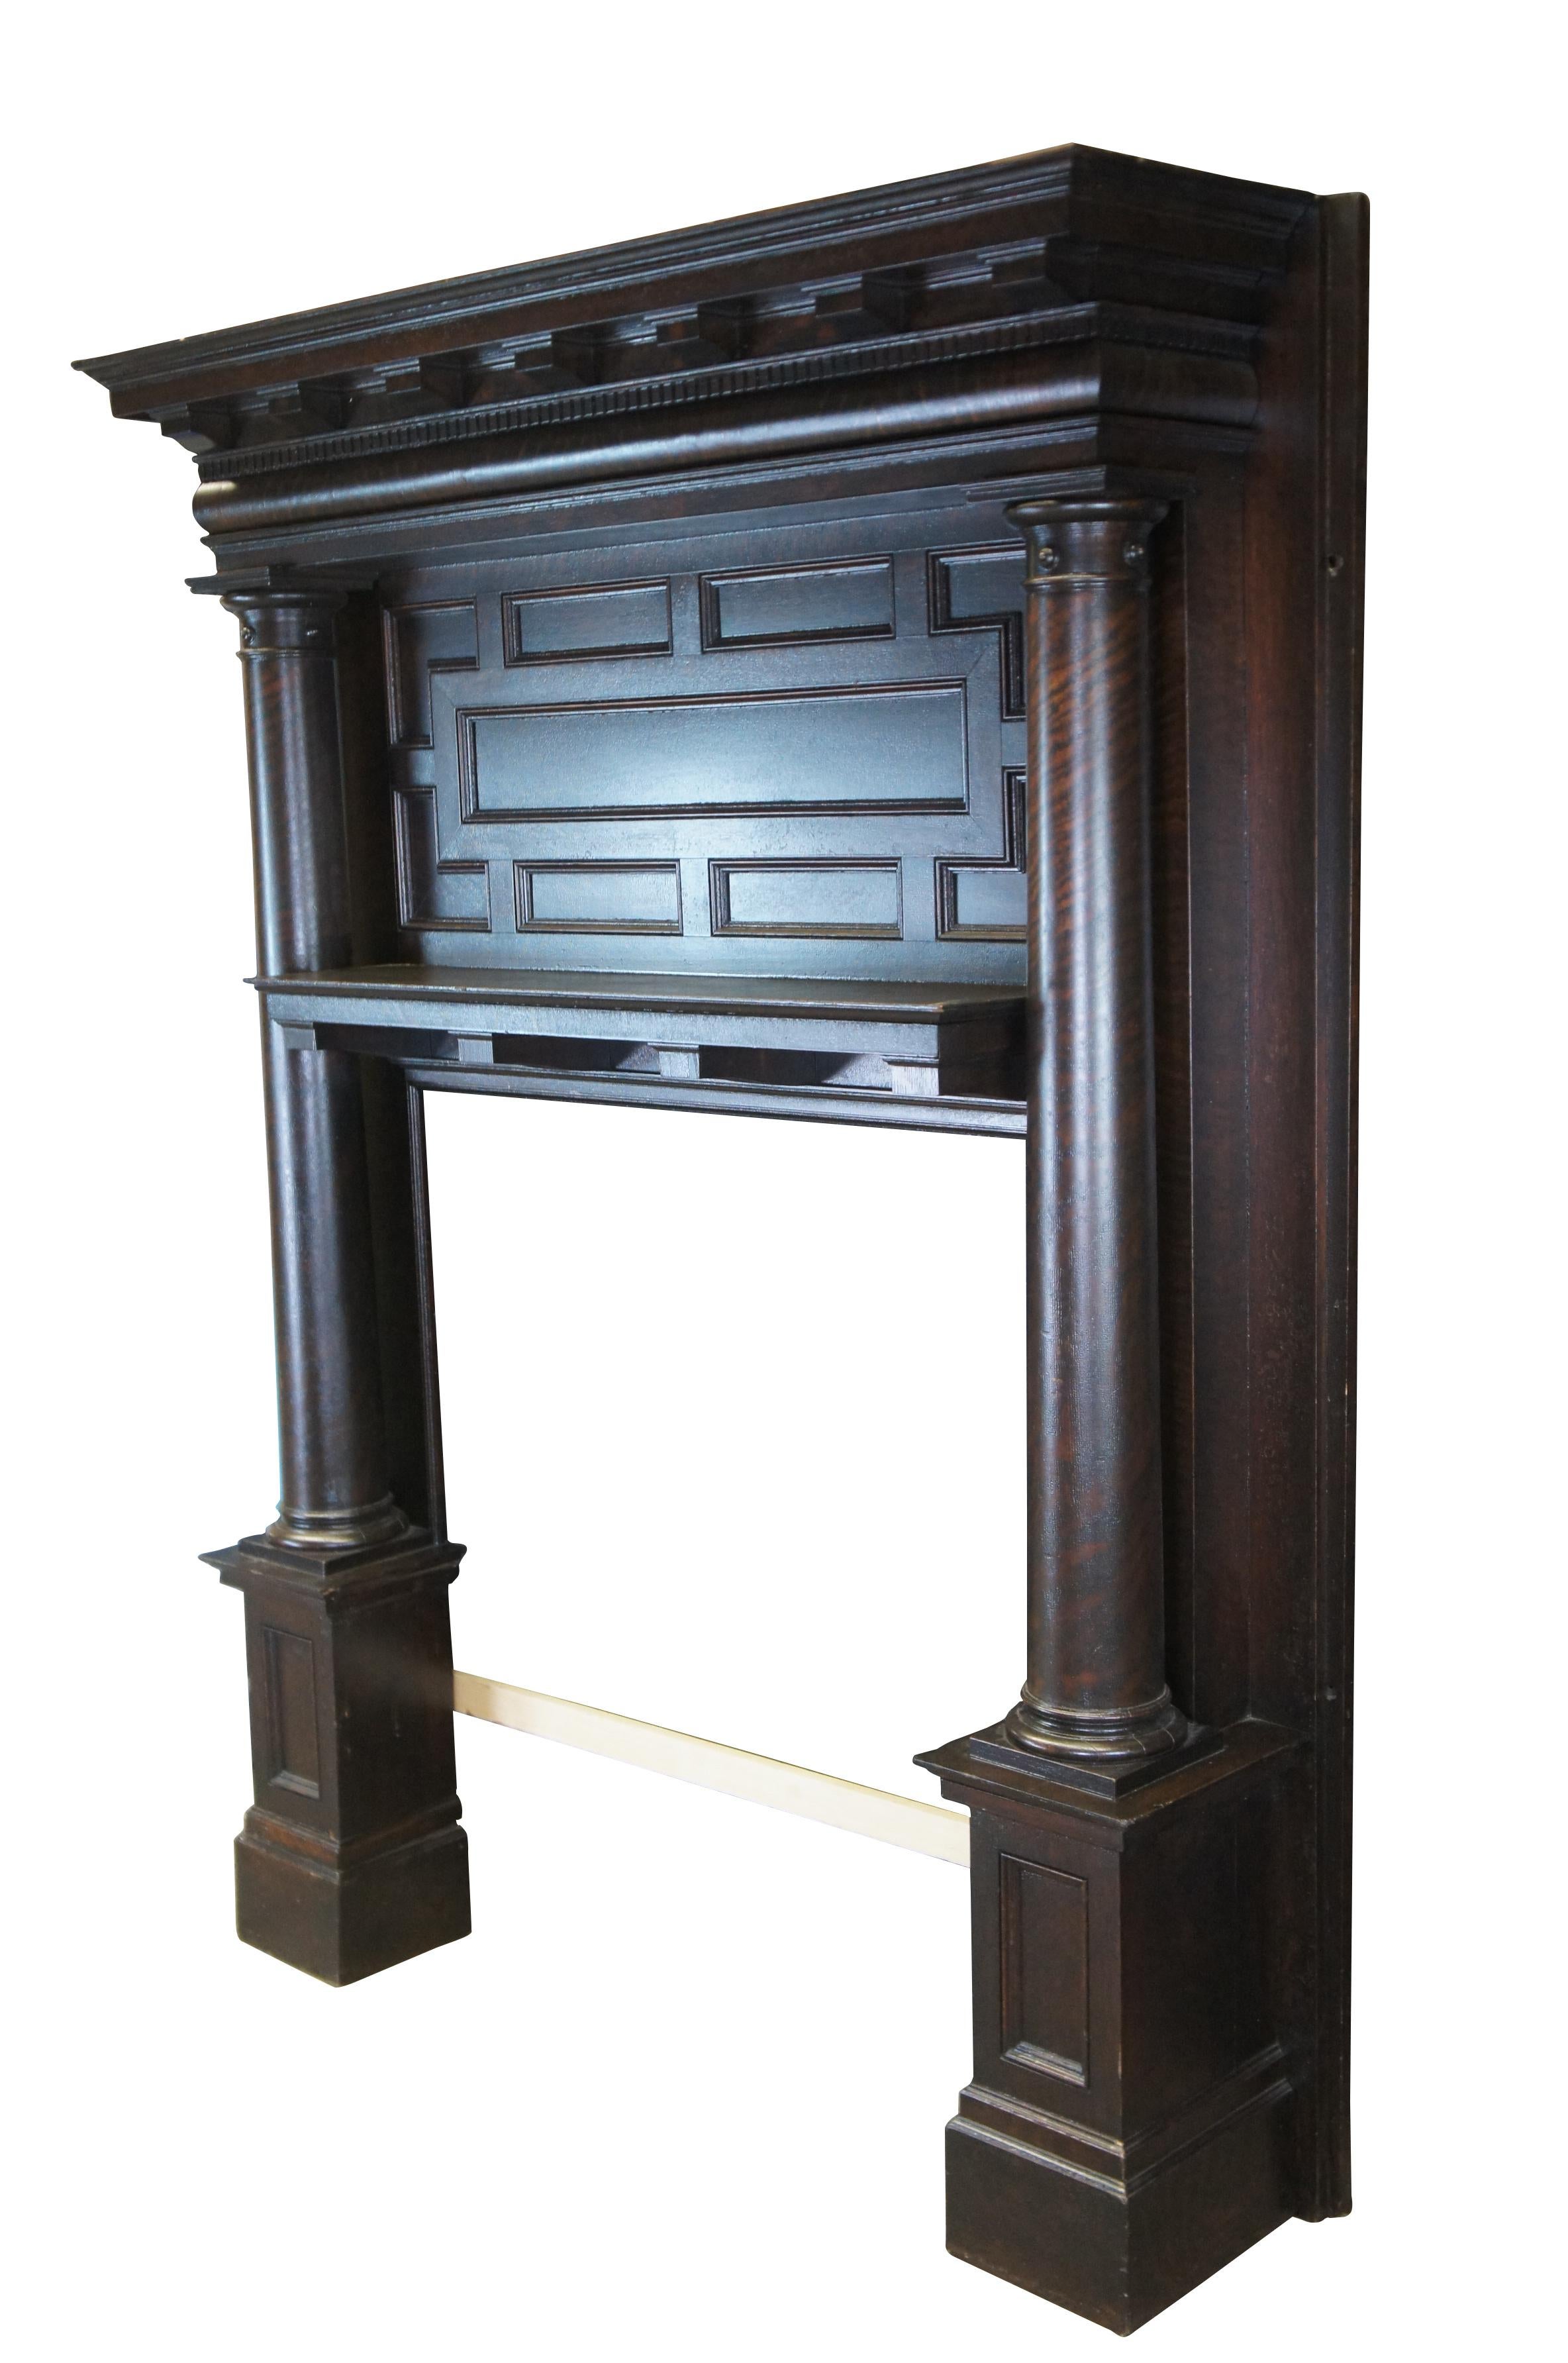 Large and impressive antique Victorian architectural salvage fireplace mantel and surround.  Expertly crafted about 1895 for a St. Louis mansion, this Renaissance design is wonderfully paneled with dentil moldings and shaped